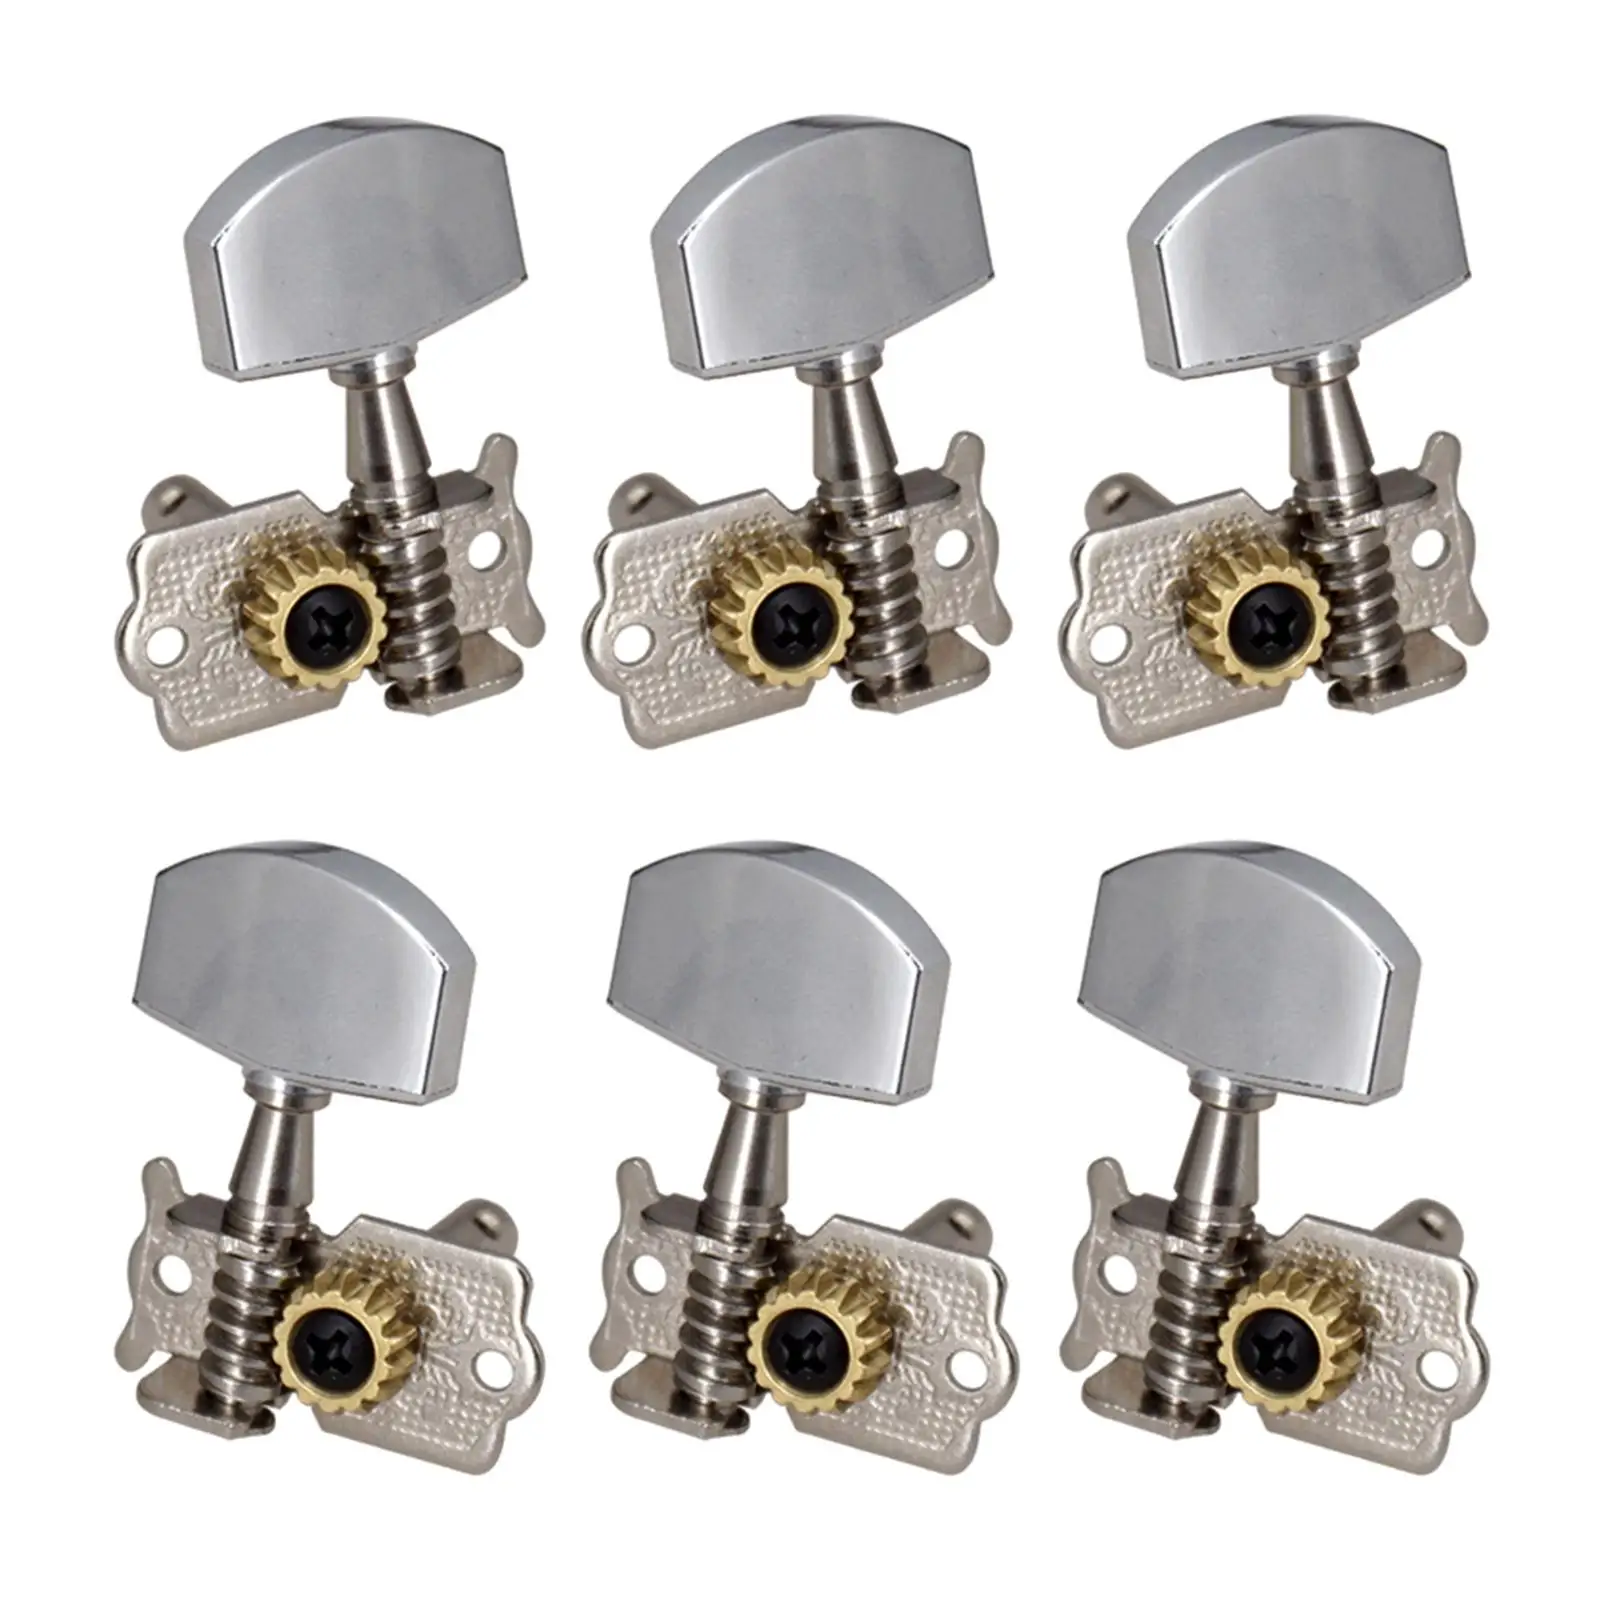 6x 3L3R Guitar Tuner Pegs Machine Head Key Peg Knobs Tuners for Electric Guitar Replacement